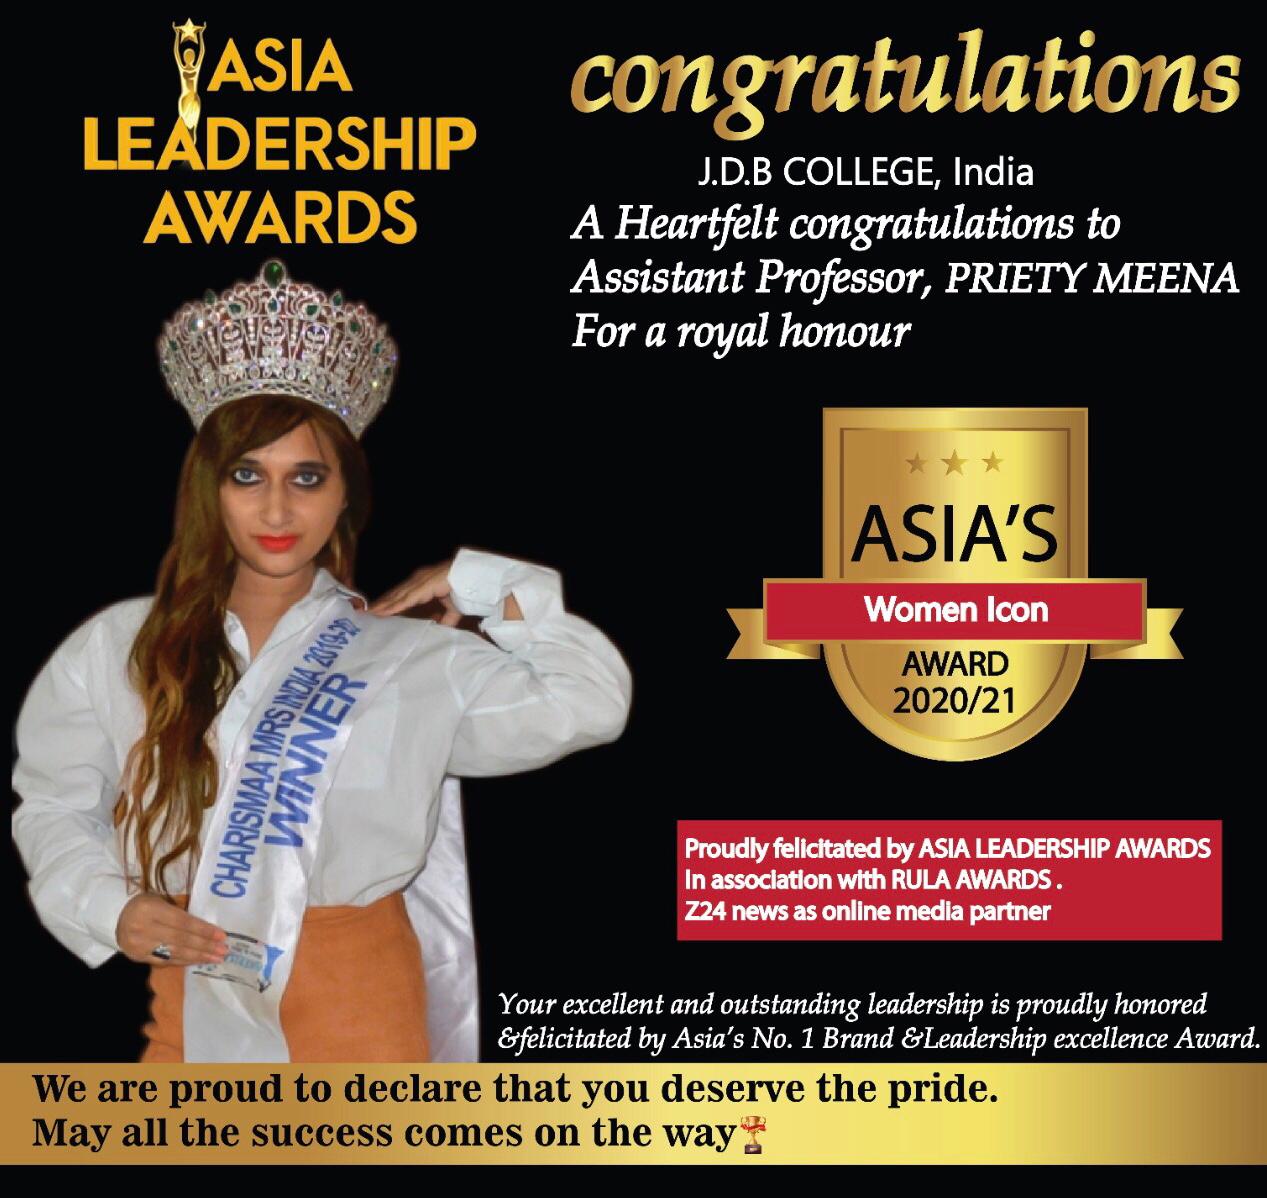 Priety Meena has bagged Asia's Women Icon Of the Year